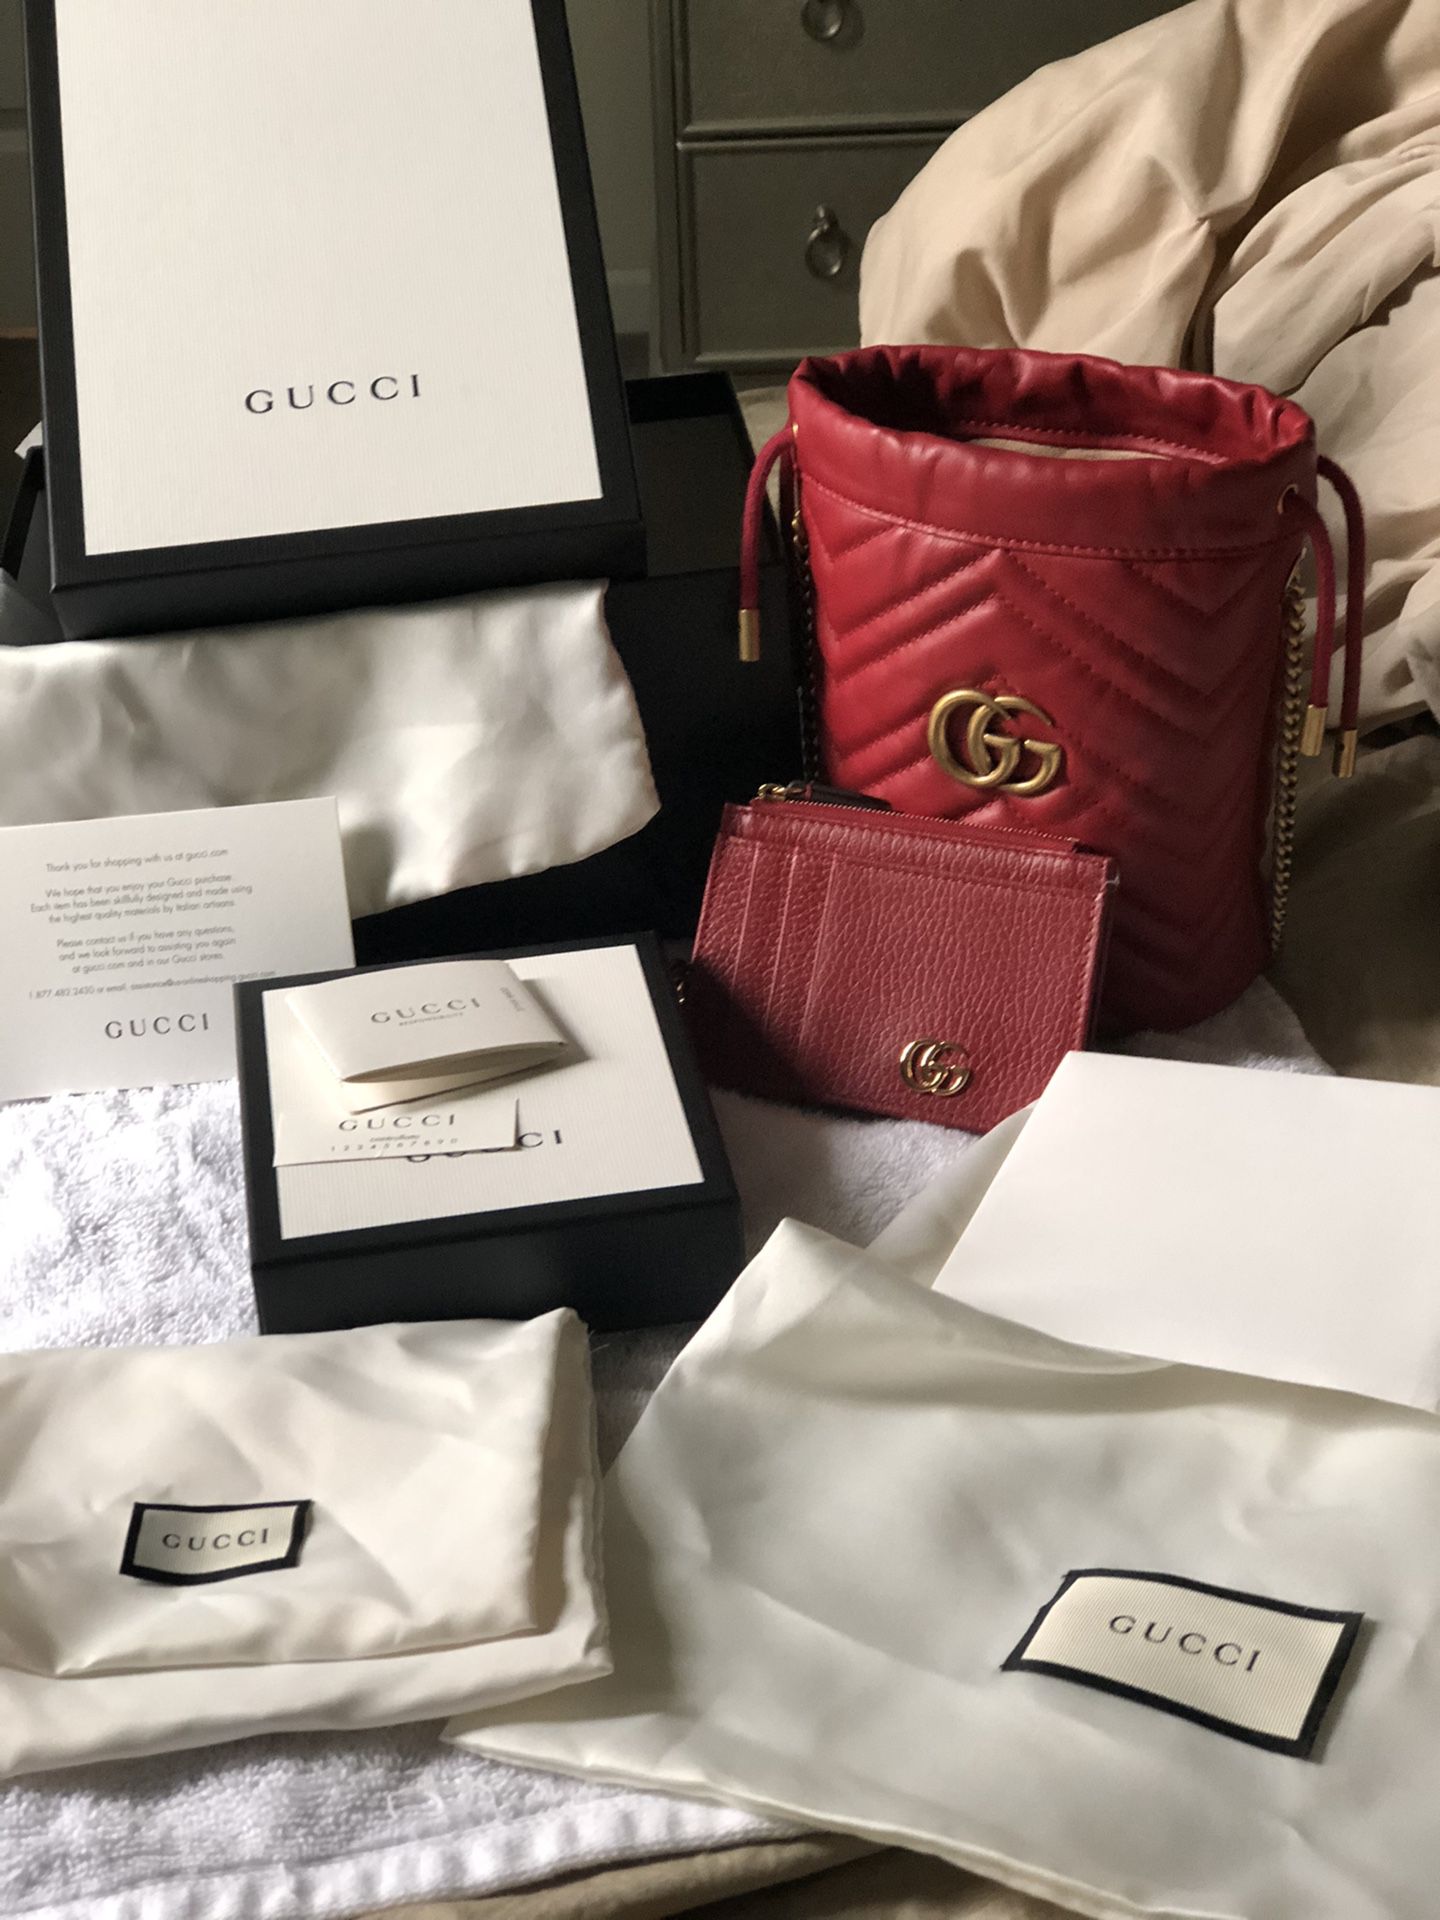 Authentic Gucci bag and wallet